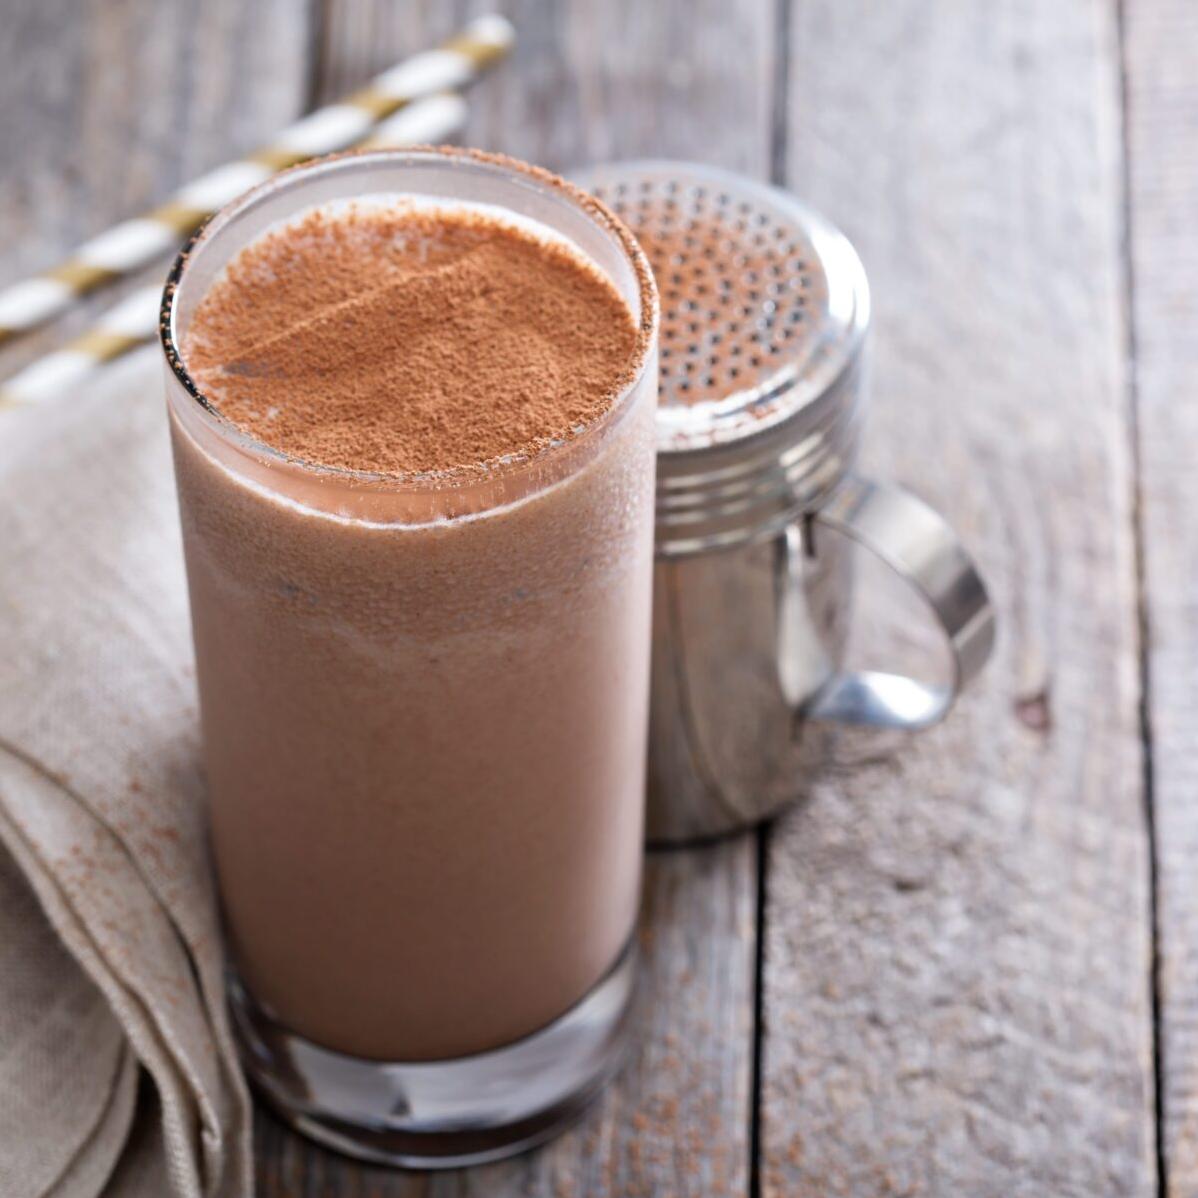  This Mocha Cinnamon Shake is sure to shake up your morning routine!